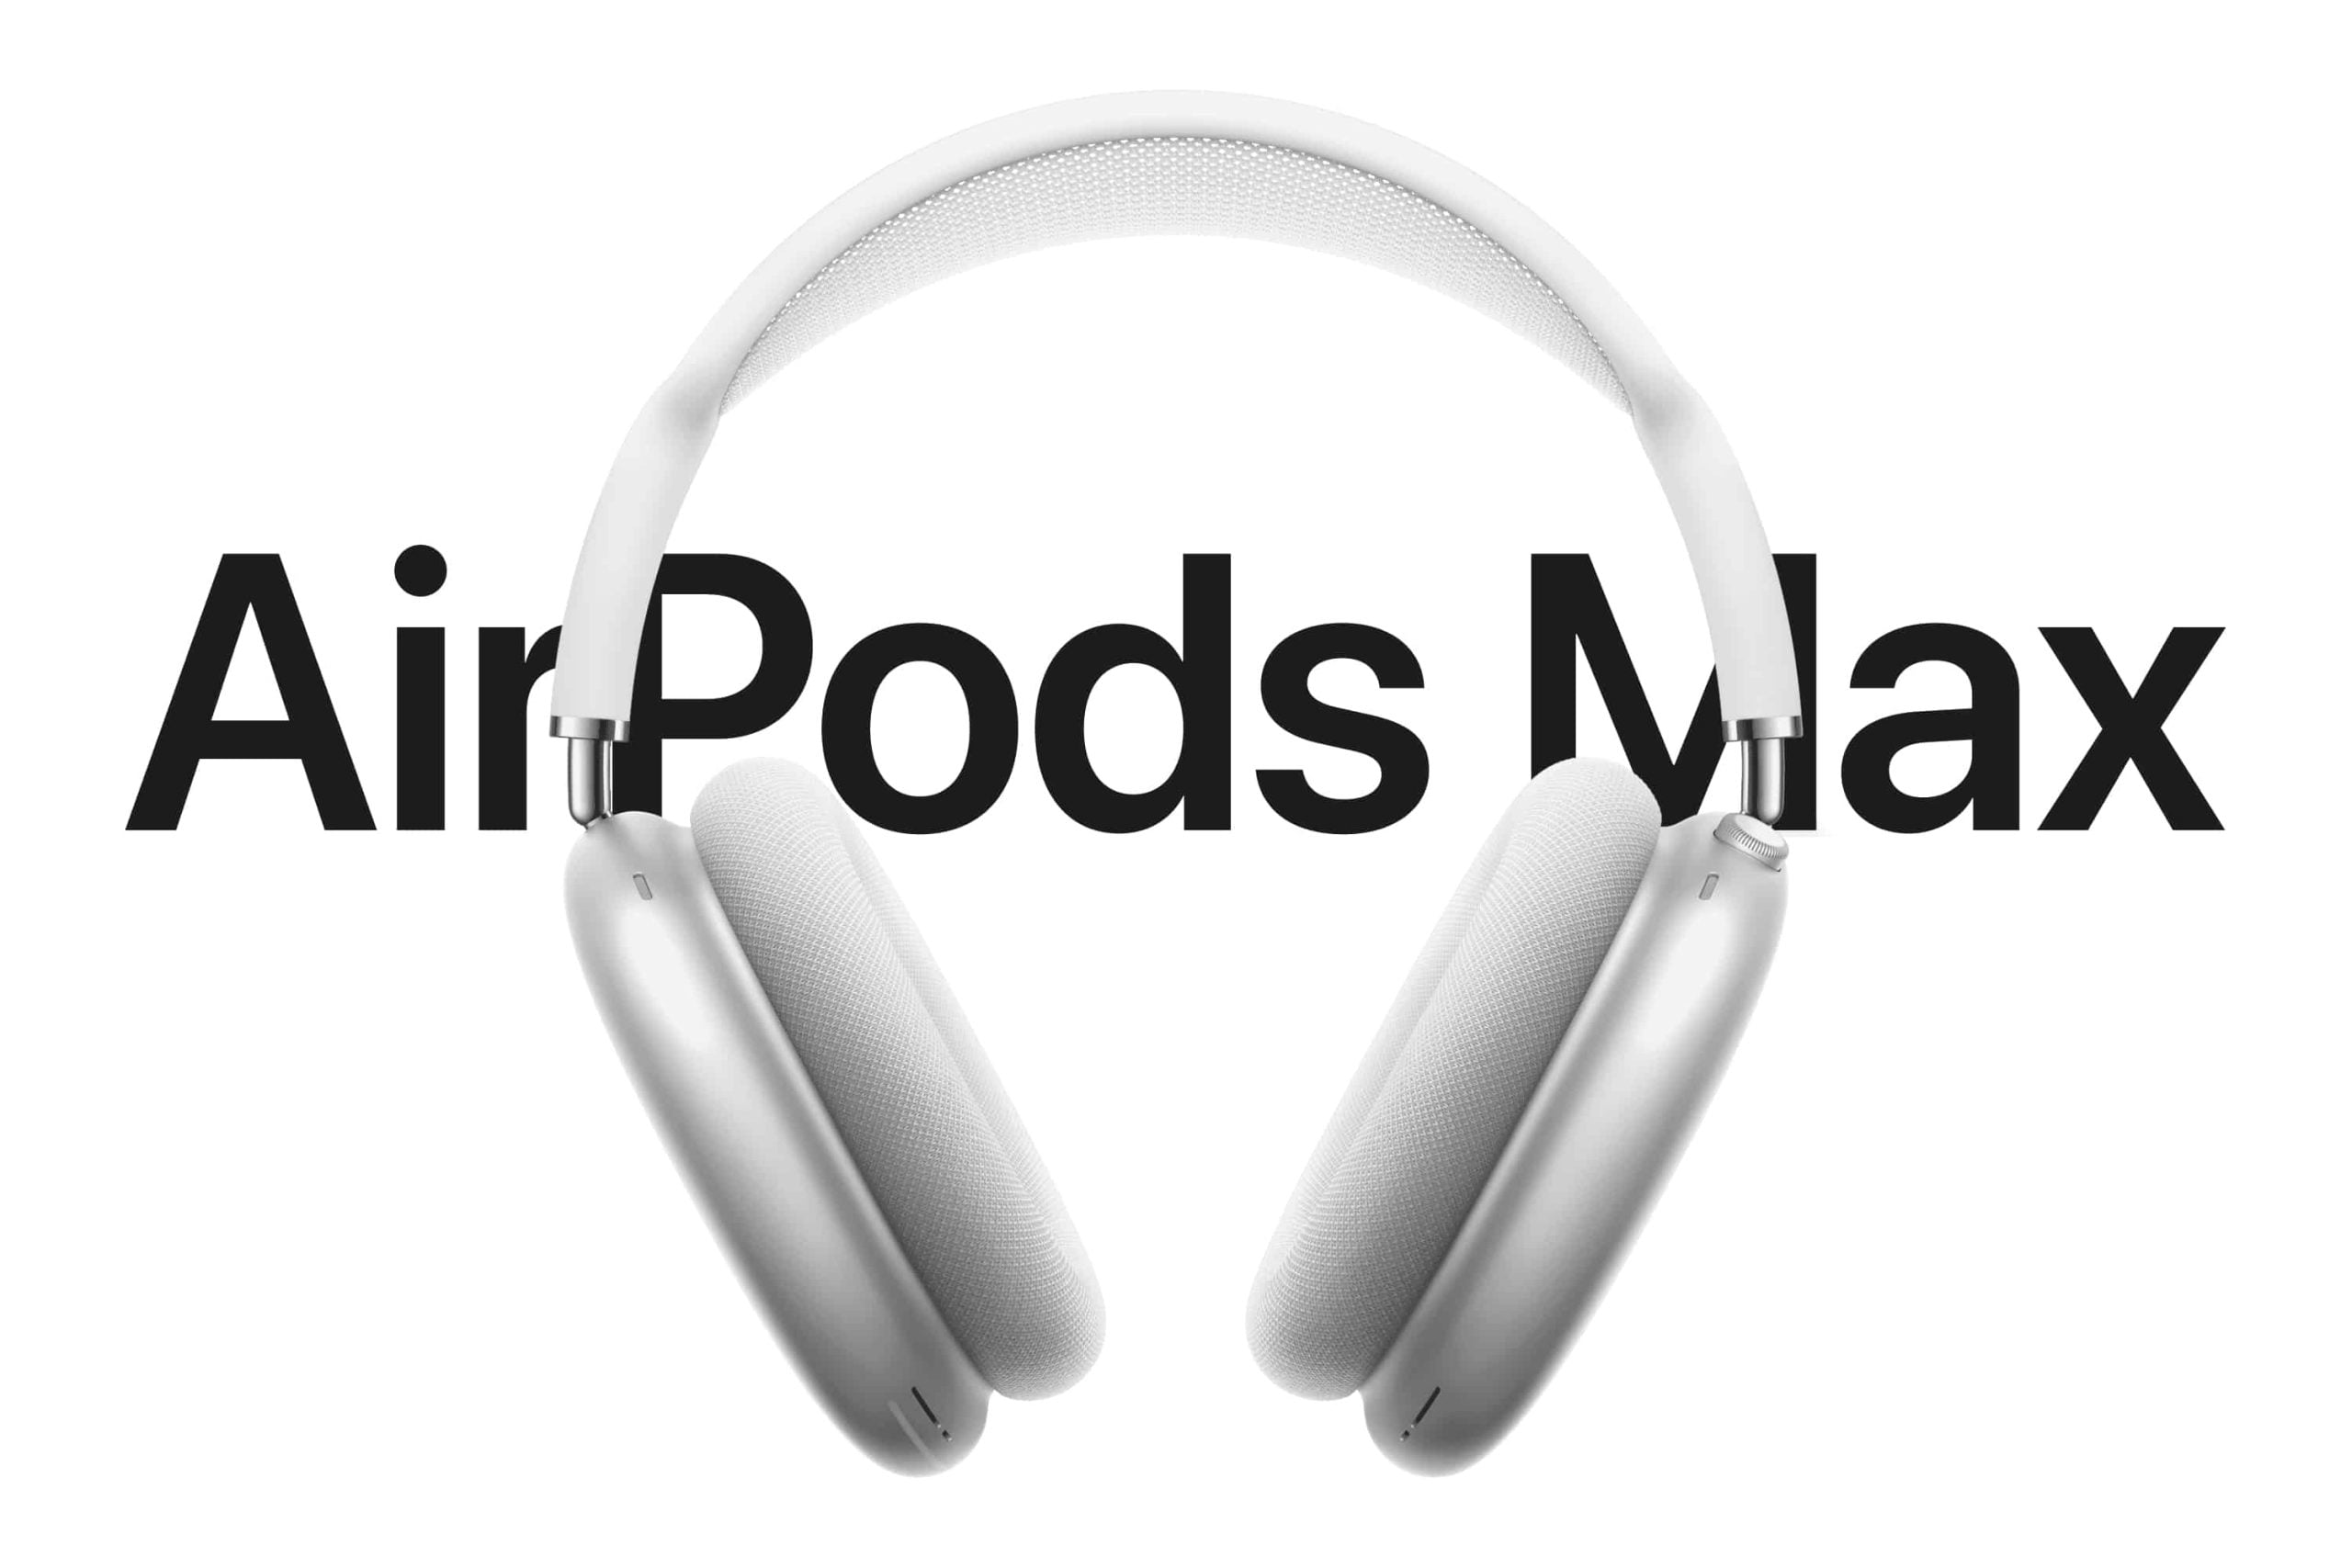 Apple introduces new over-ear headphones: AirPods Max